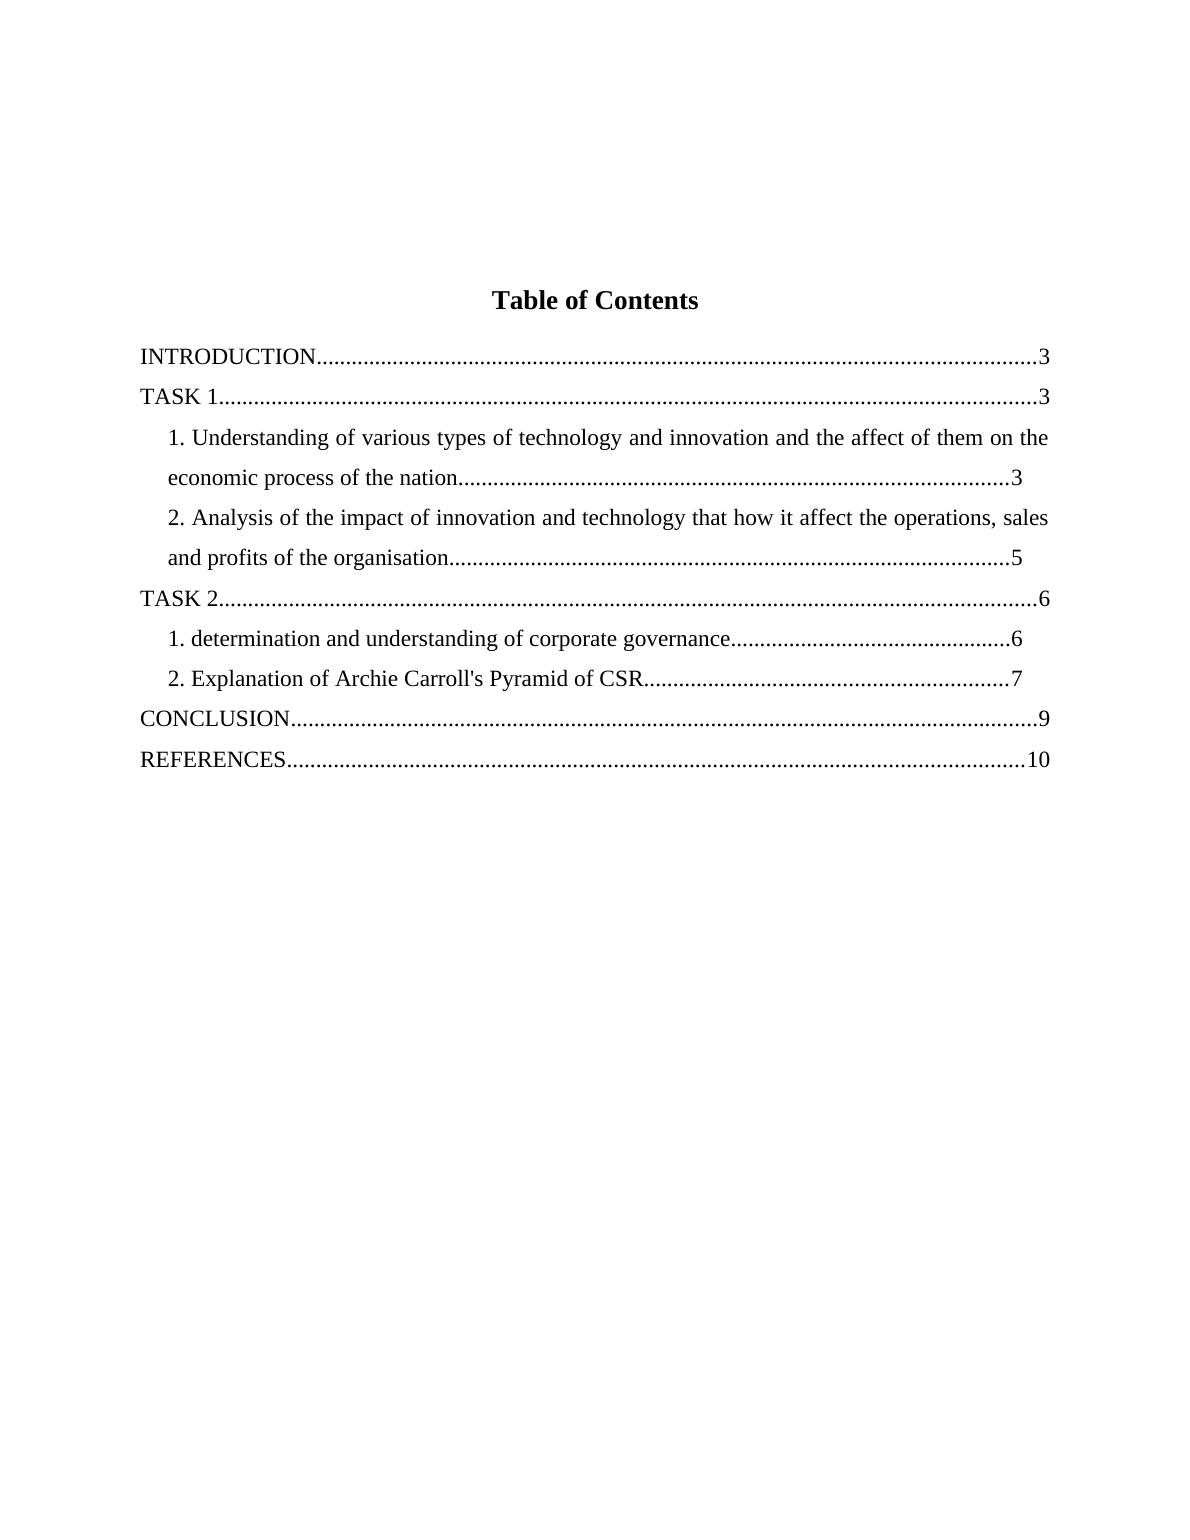 Corporate Governance and Corporate Social Responsibility : Assignment_2